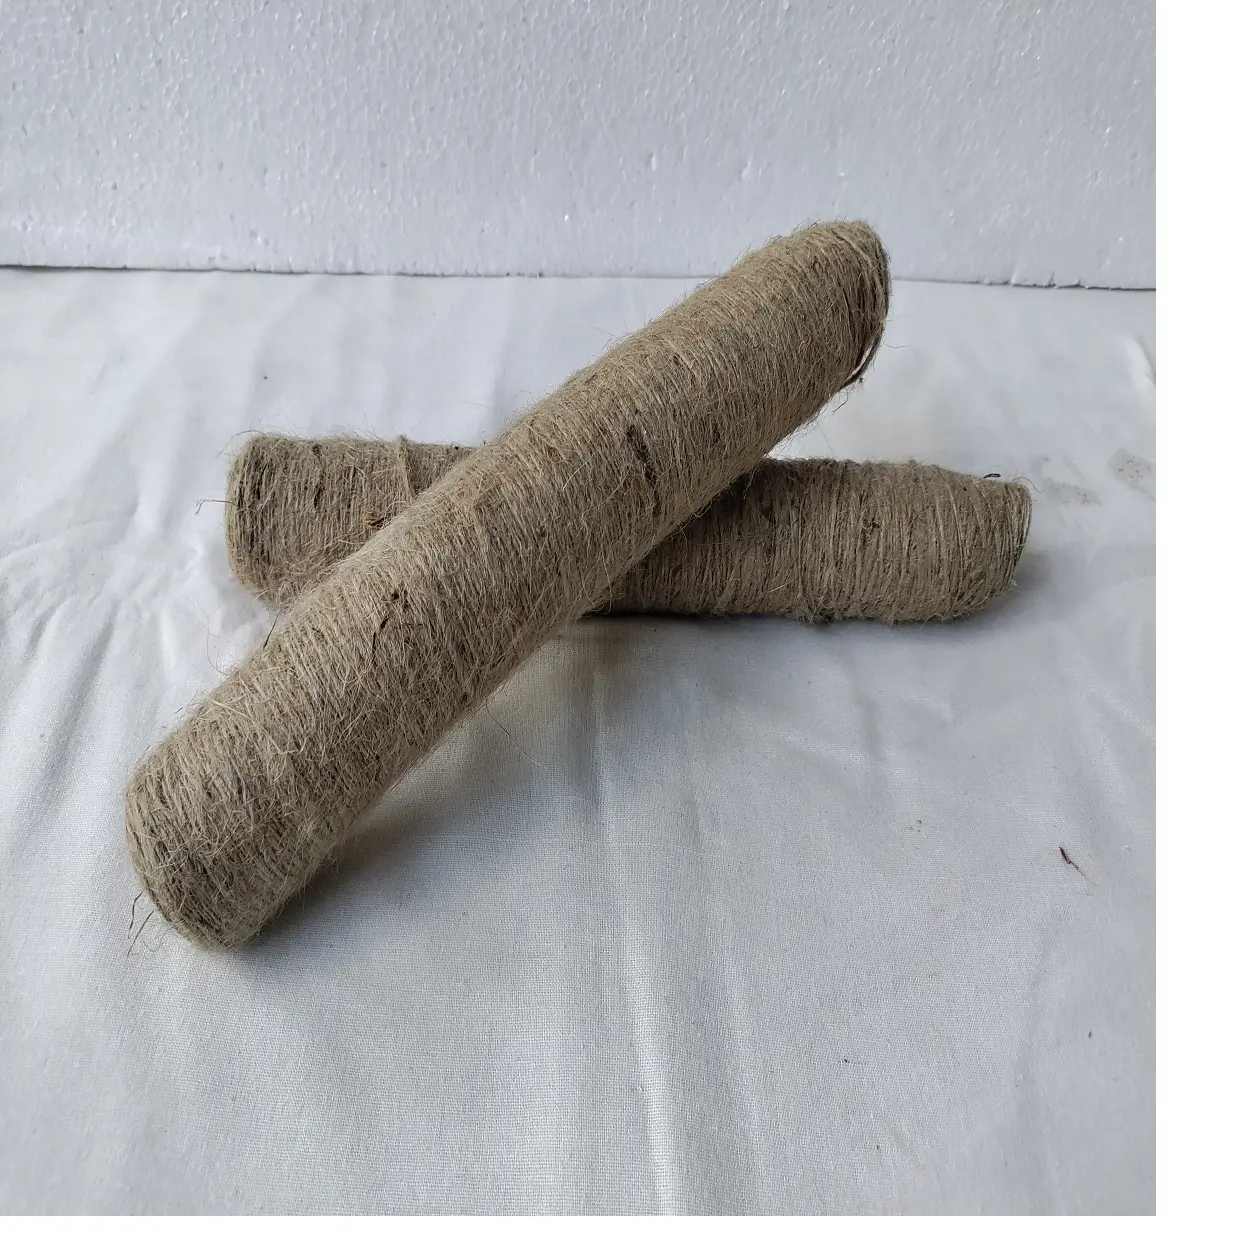 Custom made natural jute fiber yarns in 1 ply suitable for resale by yarn and fiber stores ideal for textile weavers for resale